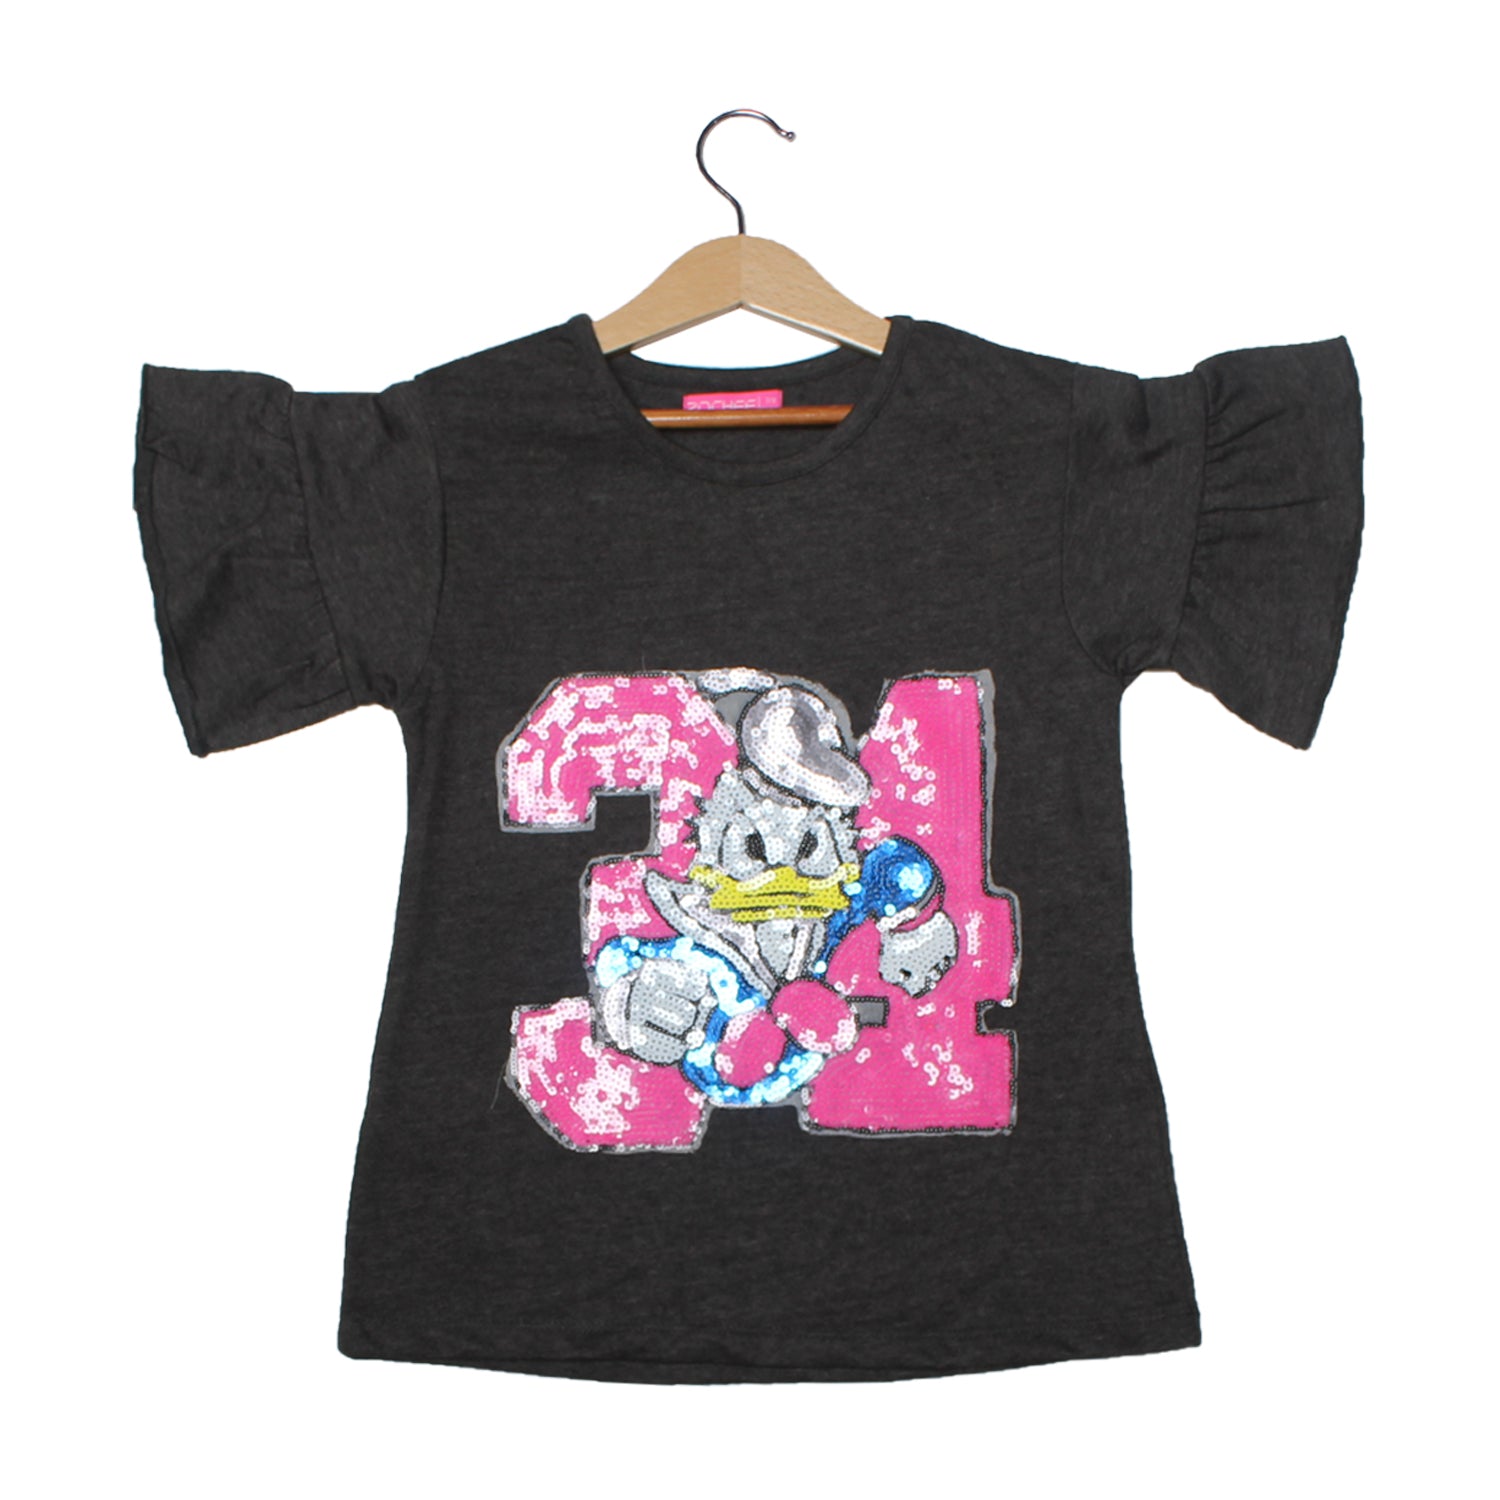 NEW CHARCOAL GREY DUCK PRINTED T-SHIRT TOP FOR GIRLS